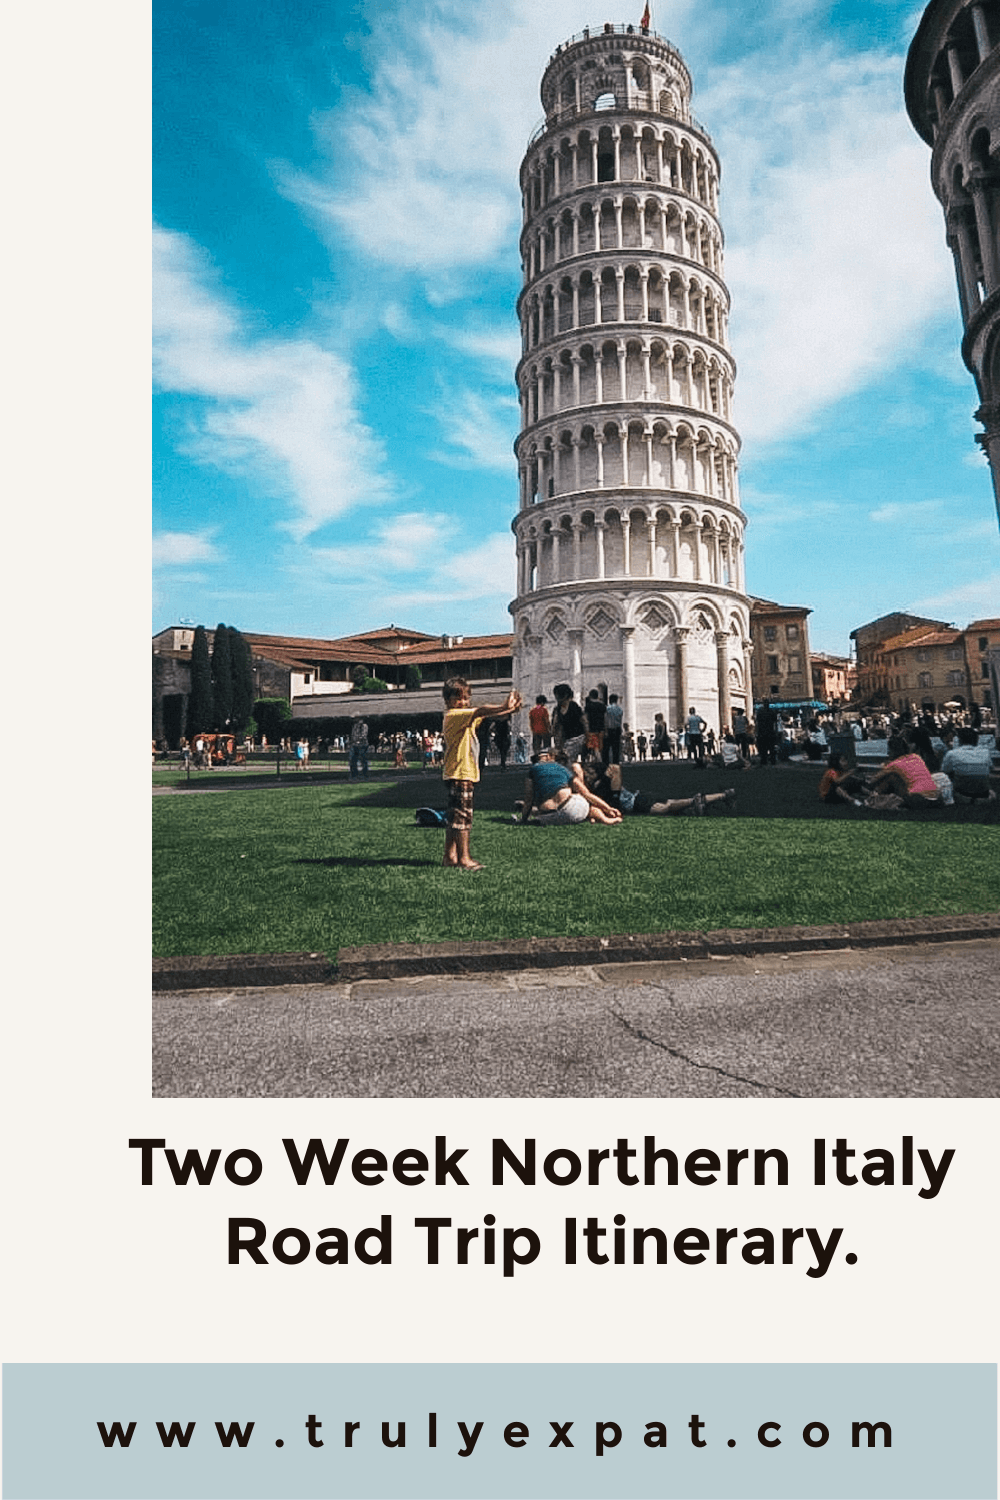 Two week Northern Italy road trip itinerary